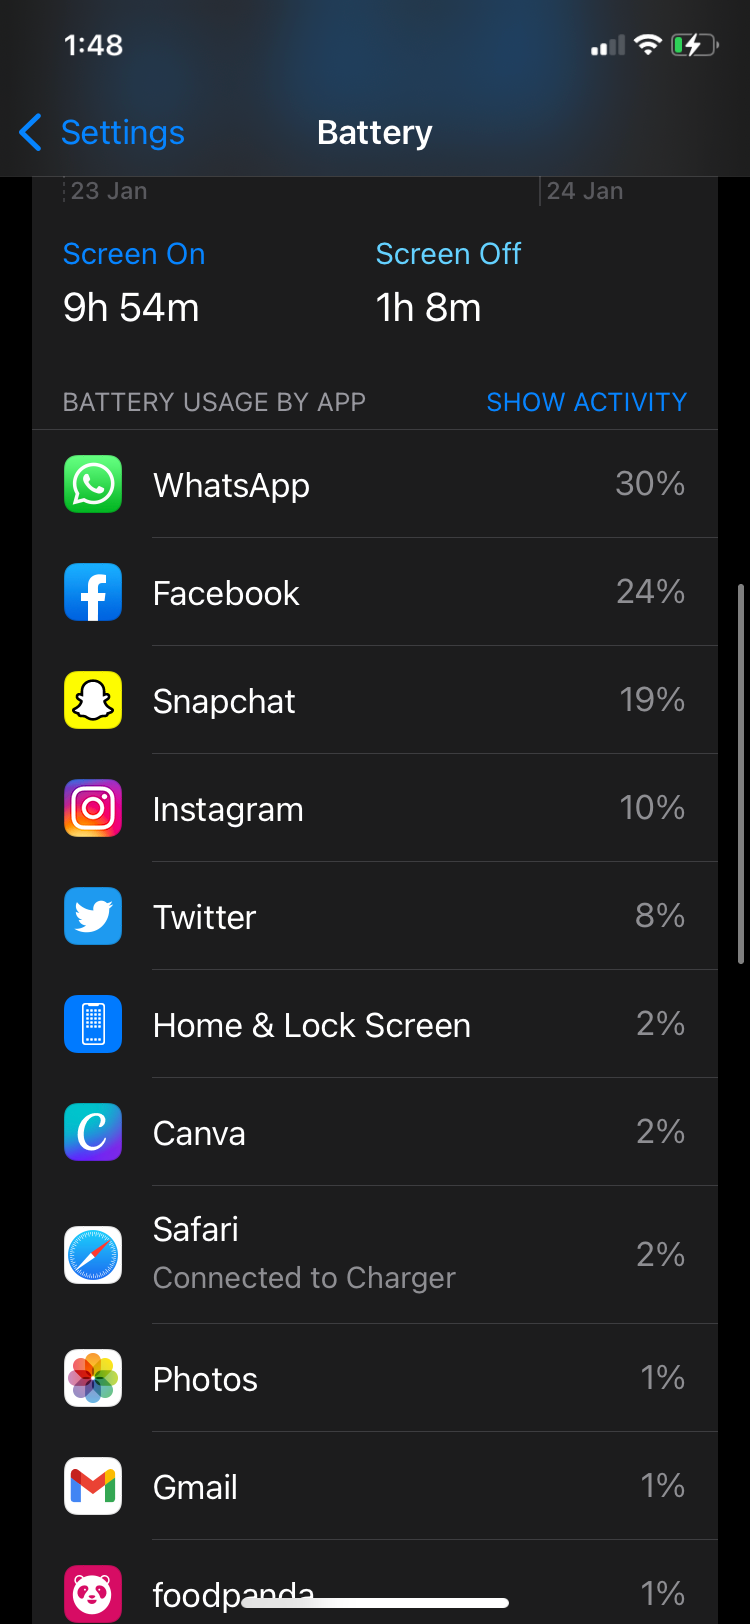 battery usage by apps